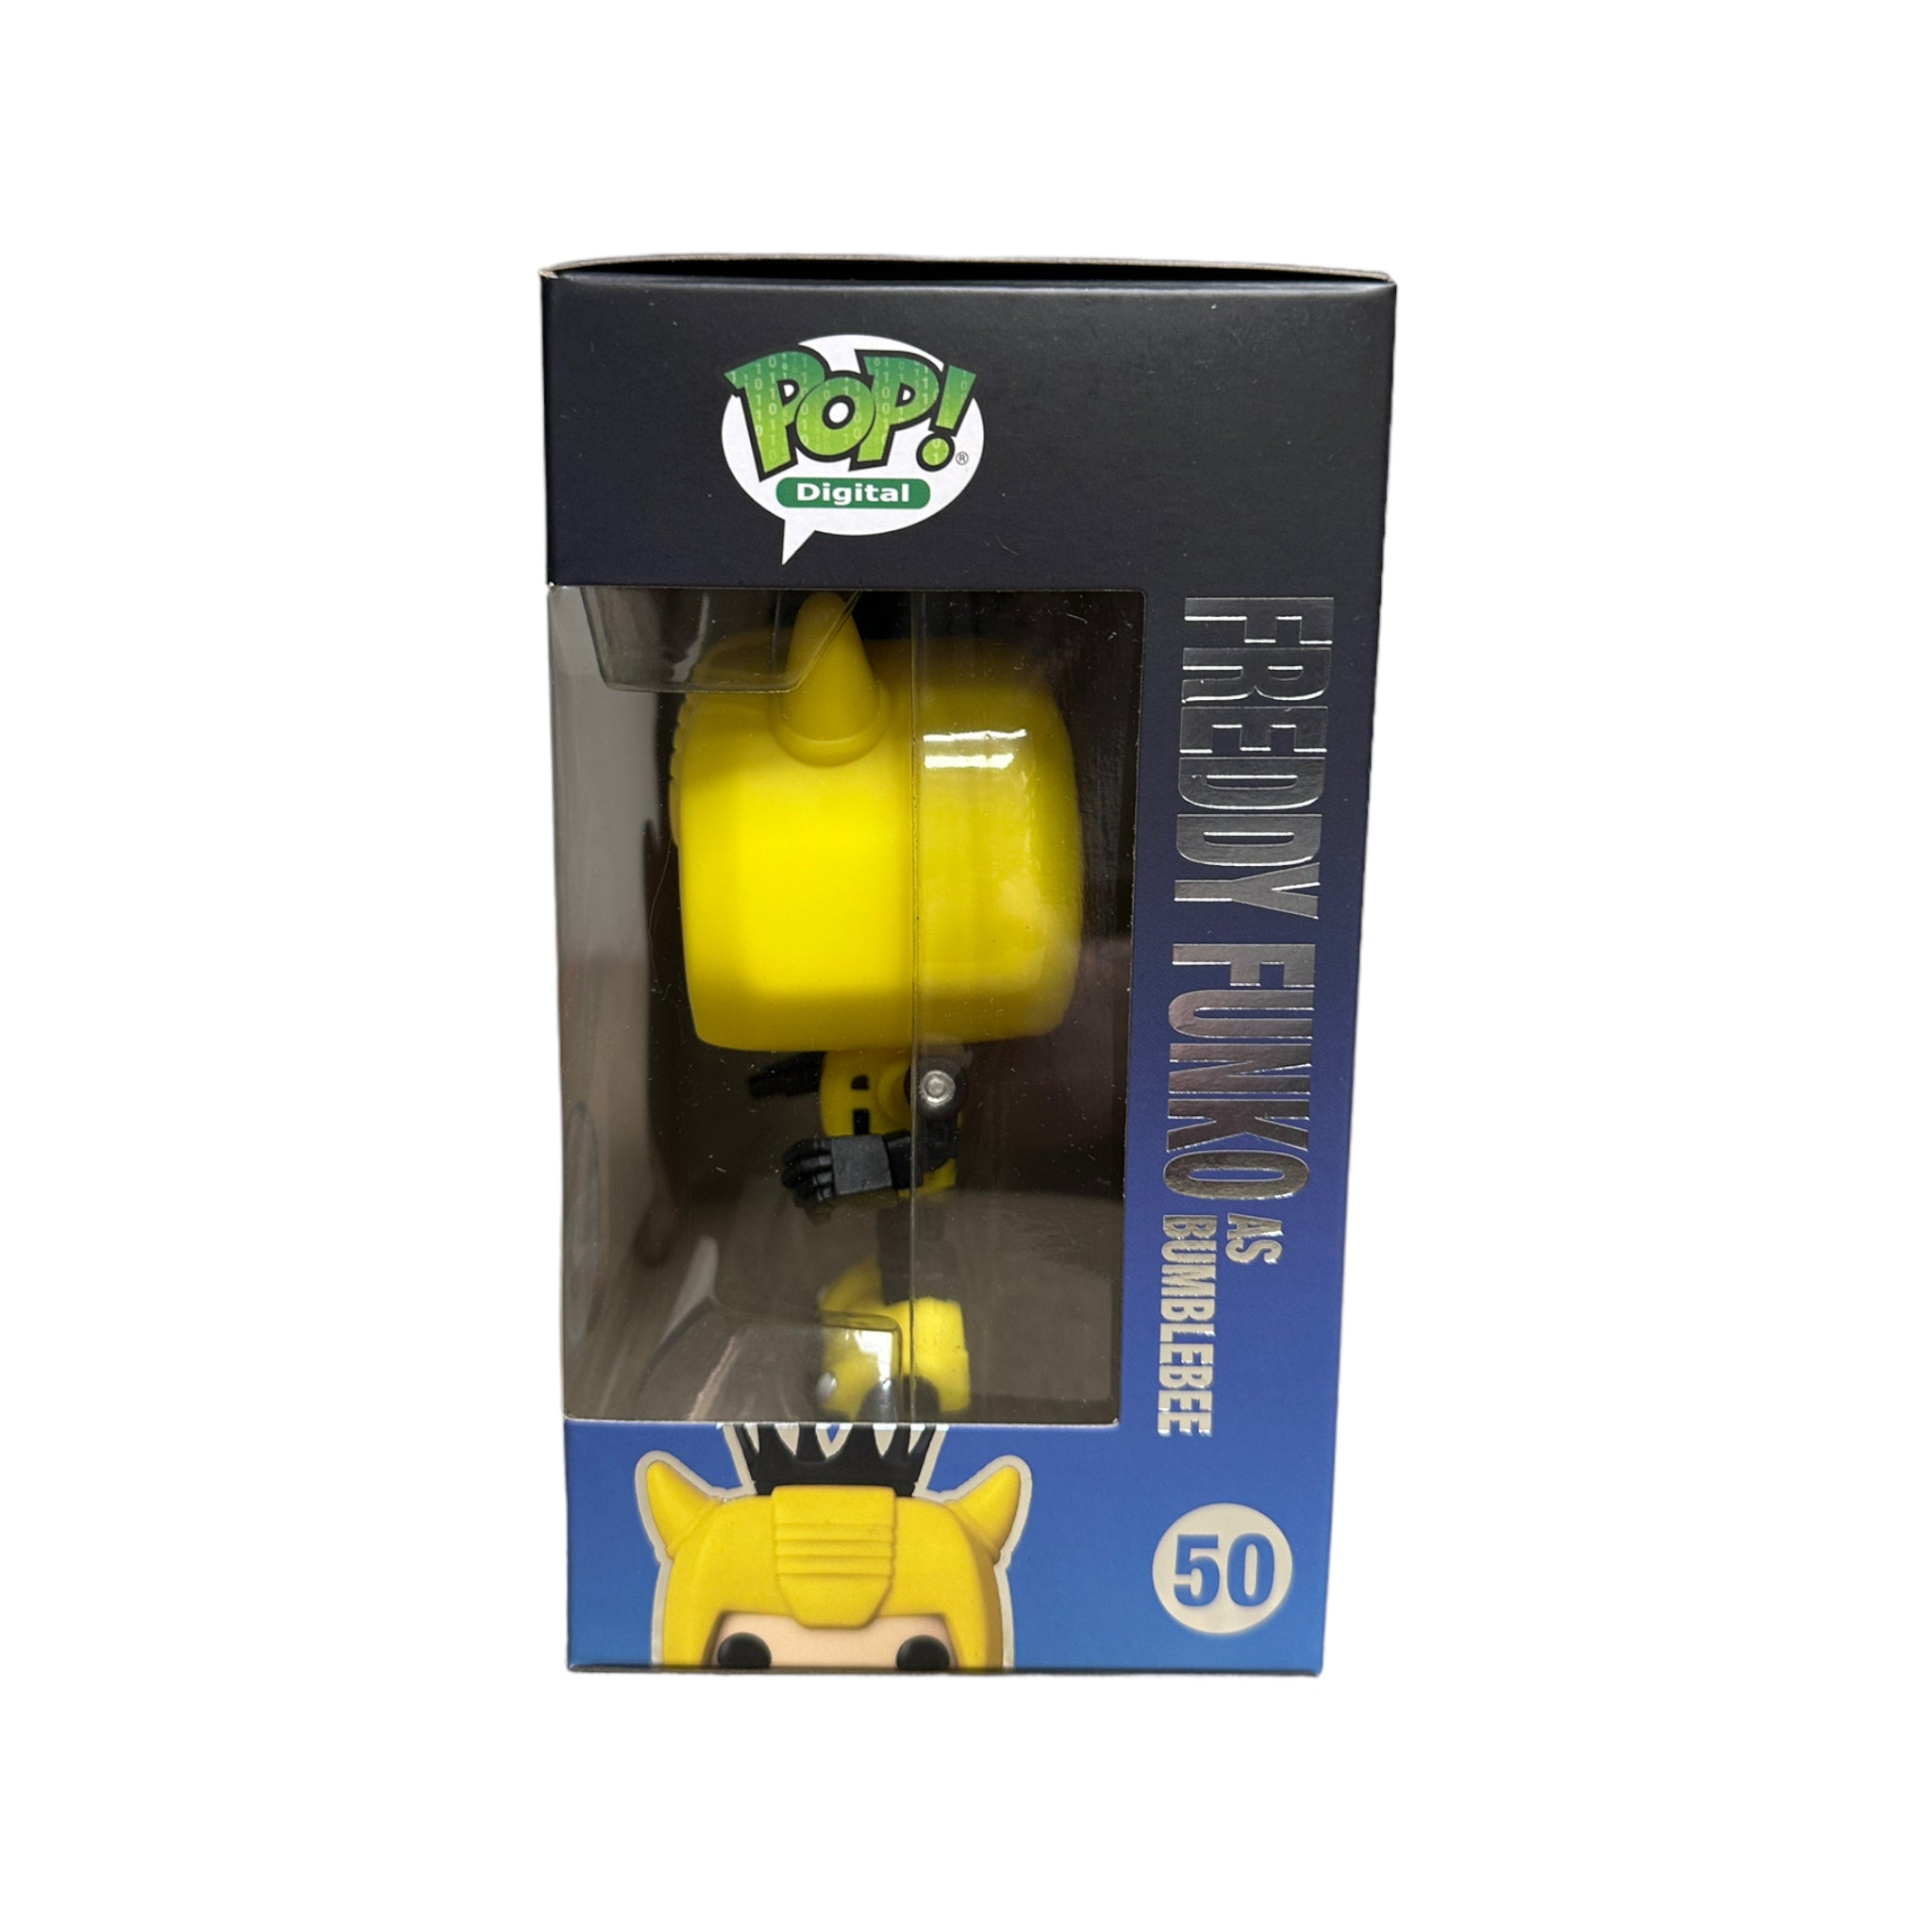 Freddy Funko as Bumblebee #50 Funko Pop! - Transformers - NFT Release Exclusive LE2397 Pcs - Condition 9.5/10